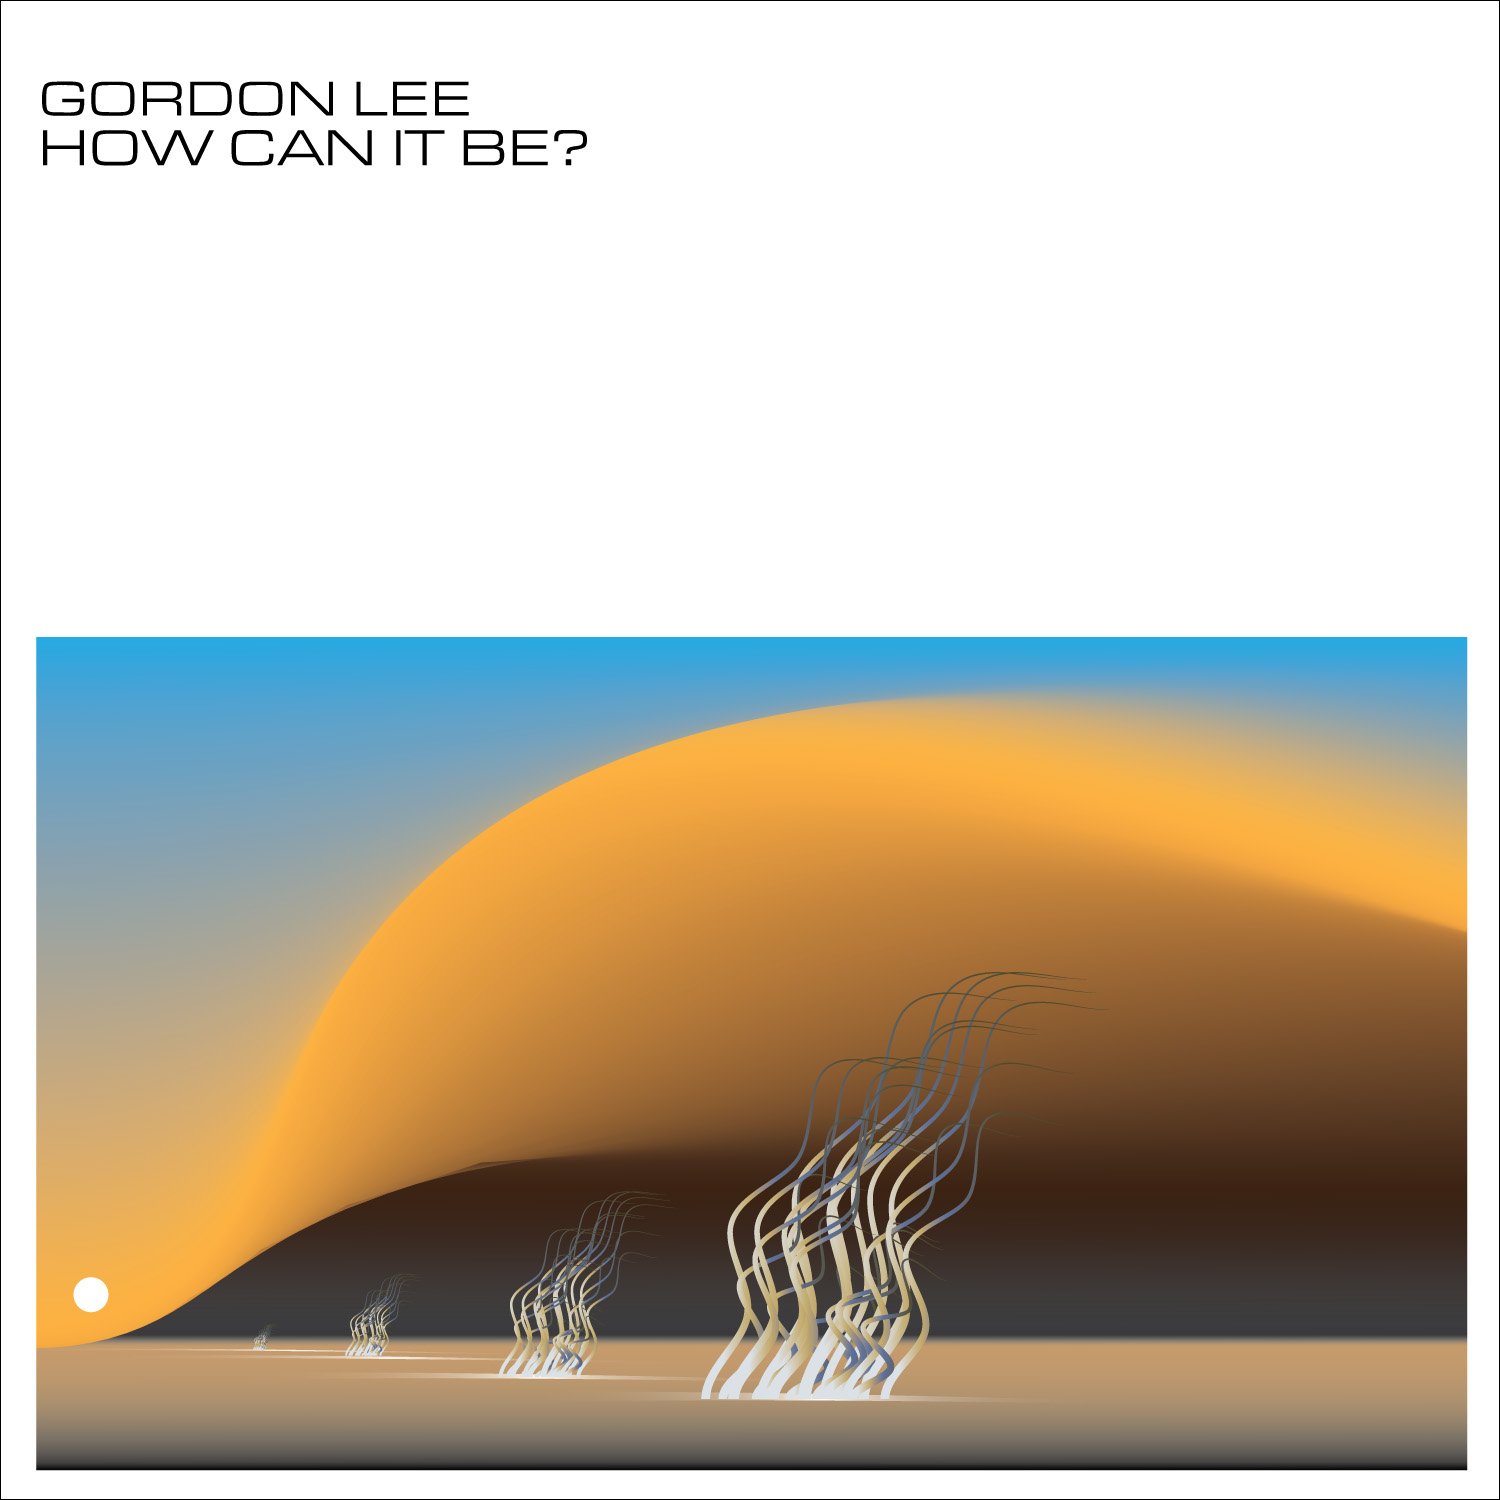 Gordon Lee - How Can it Be cover final with rule.jpg